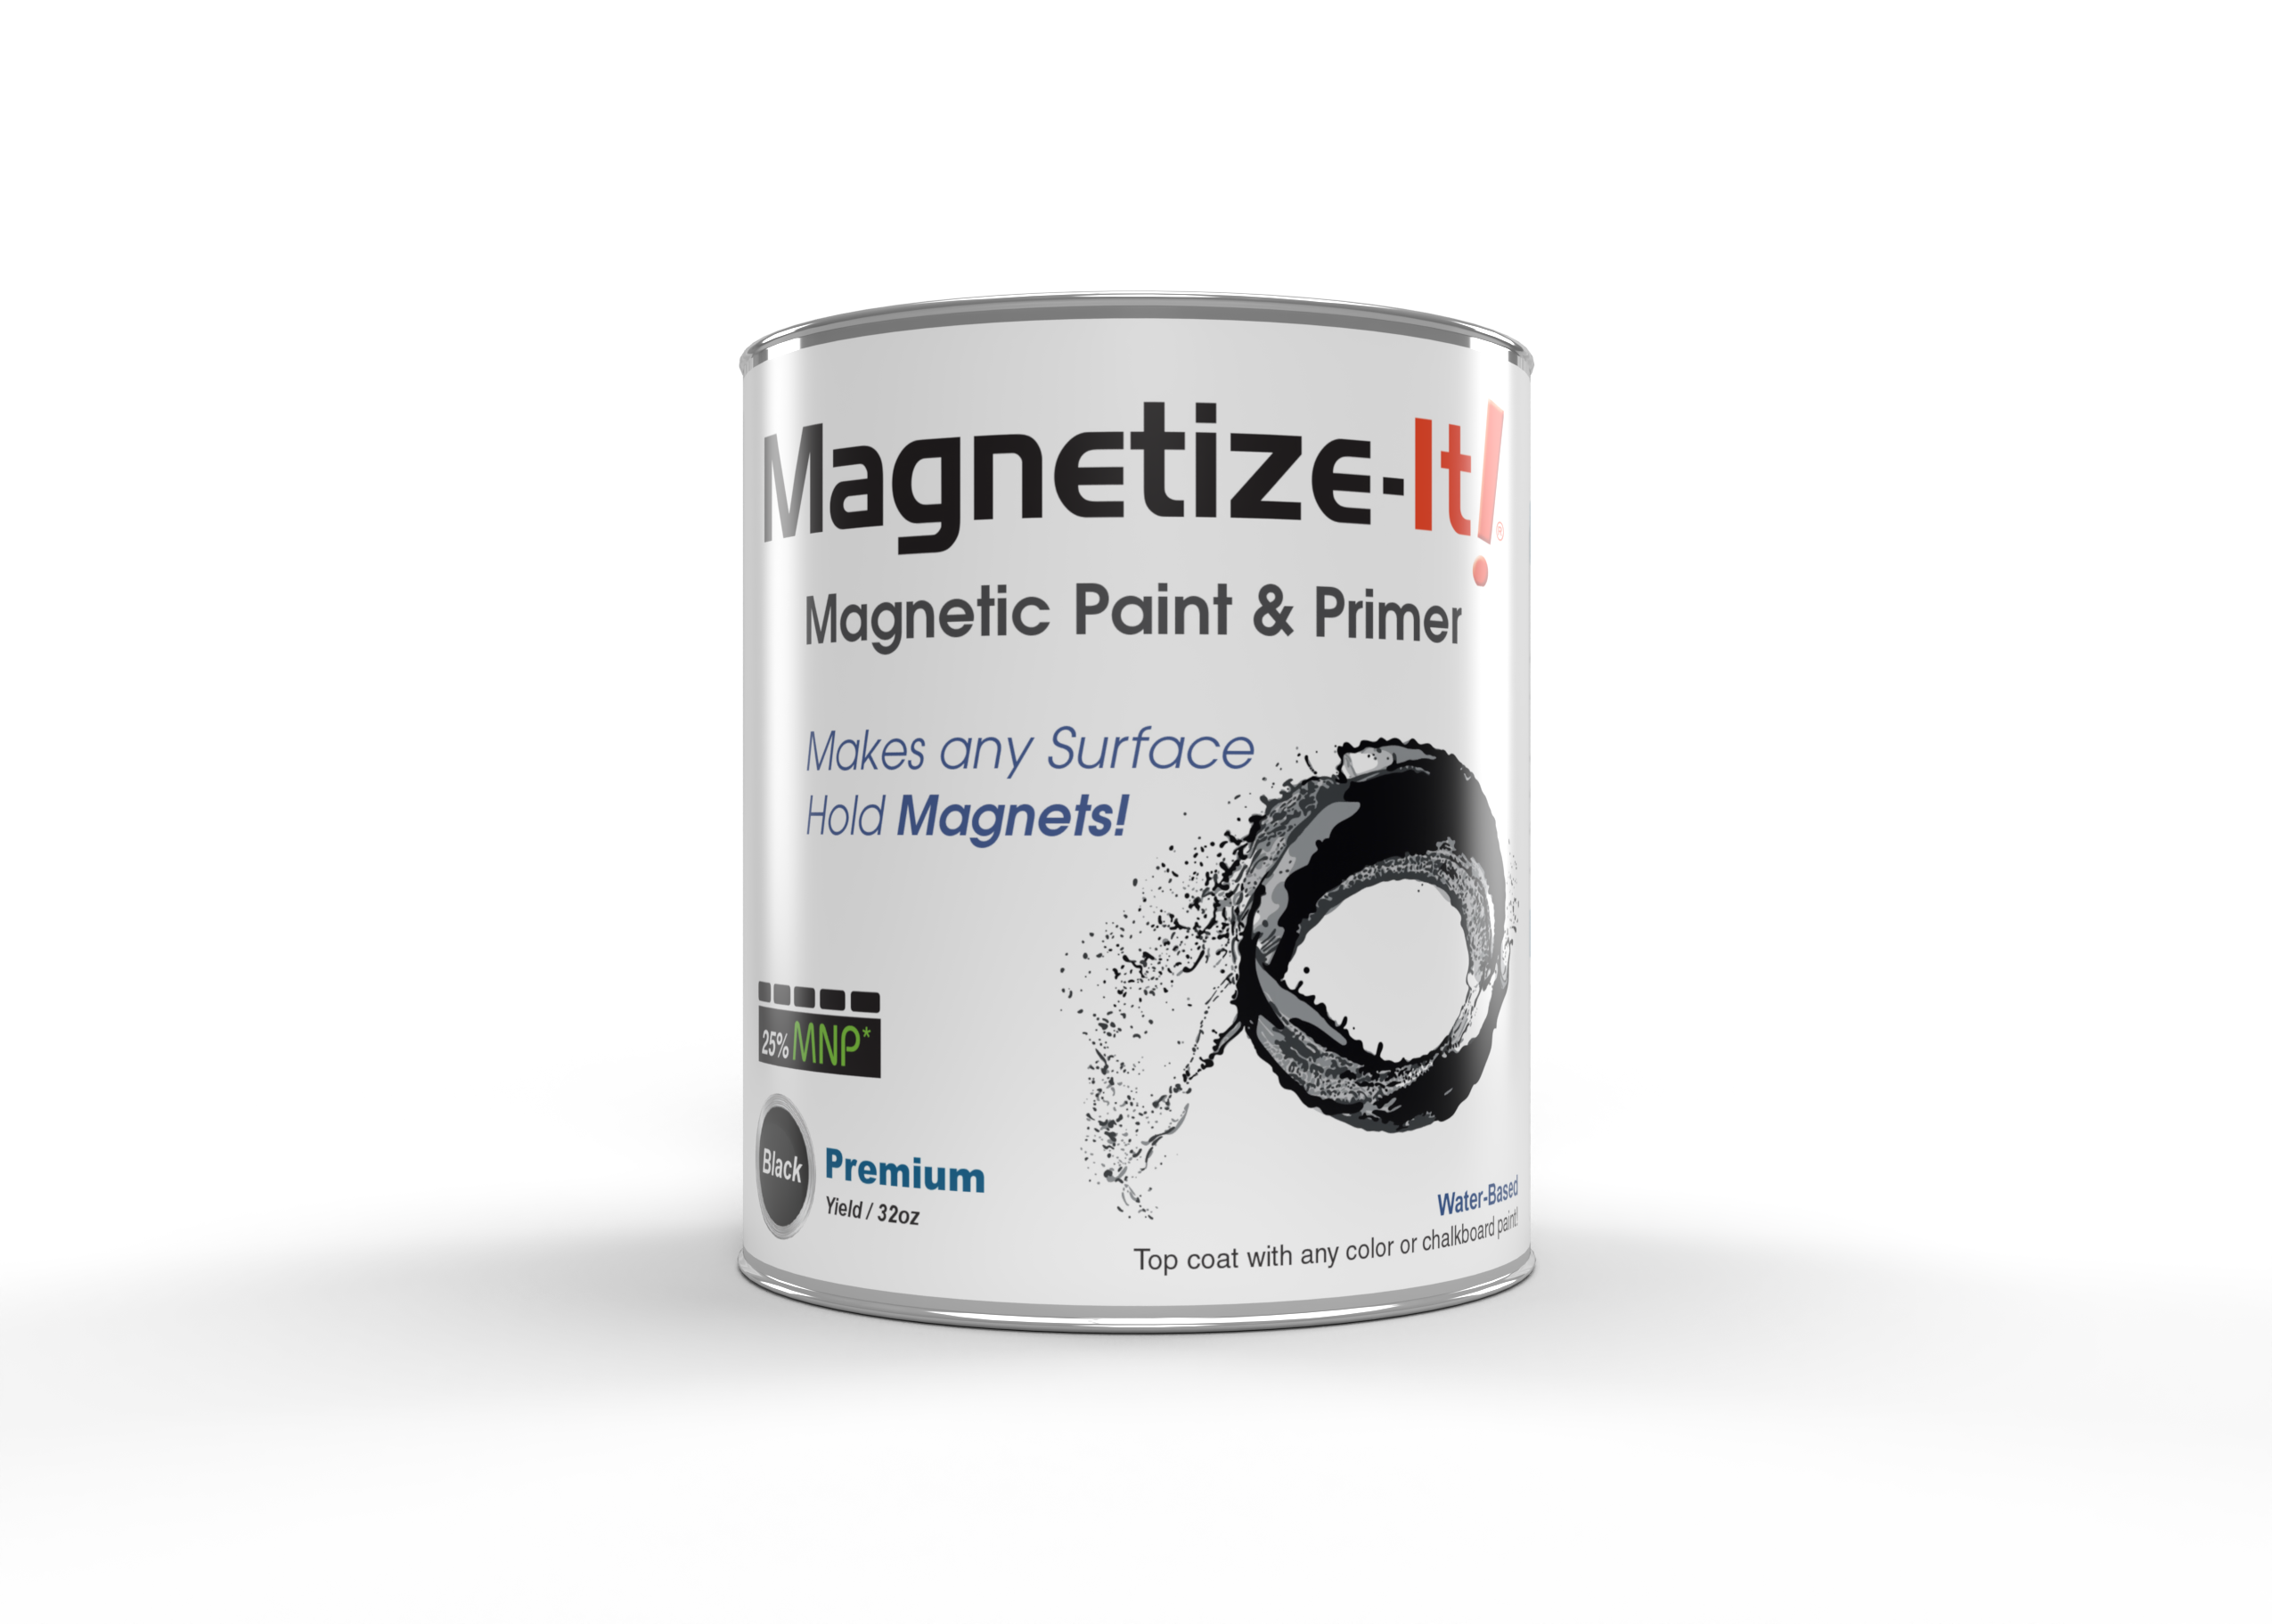 Magnetize-It! Magnetic Paint & Primer (Water Based) – Premium Yield 32 oz